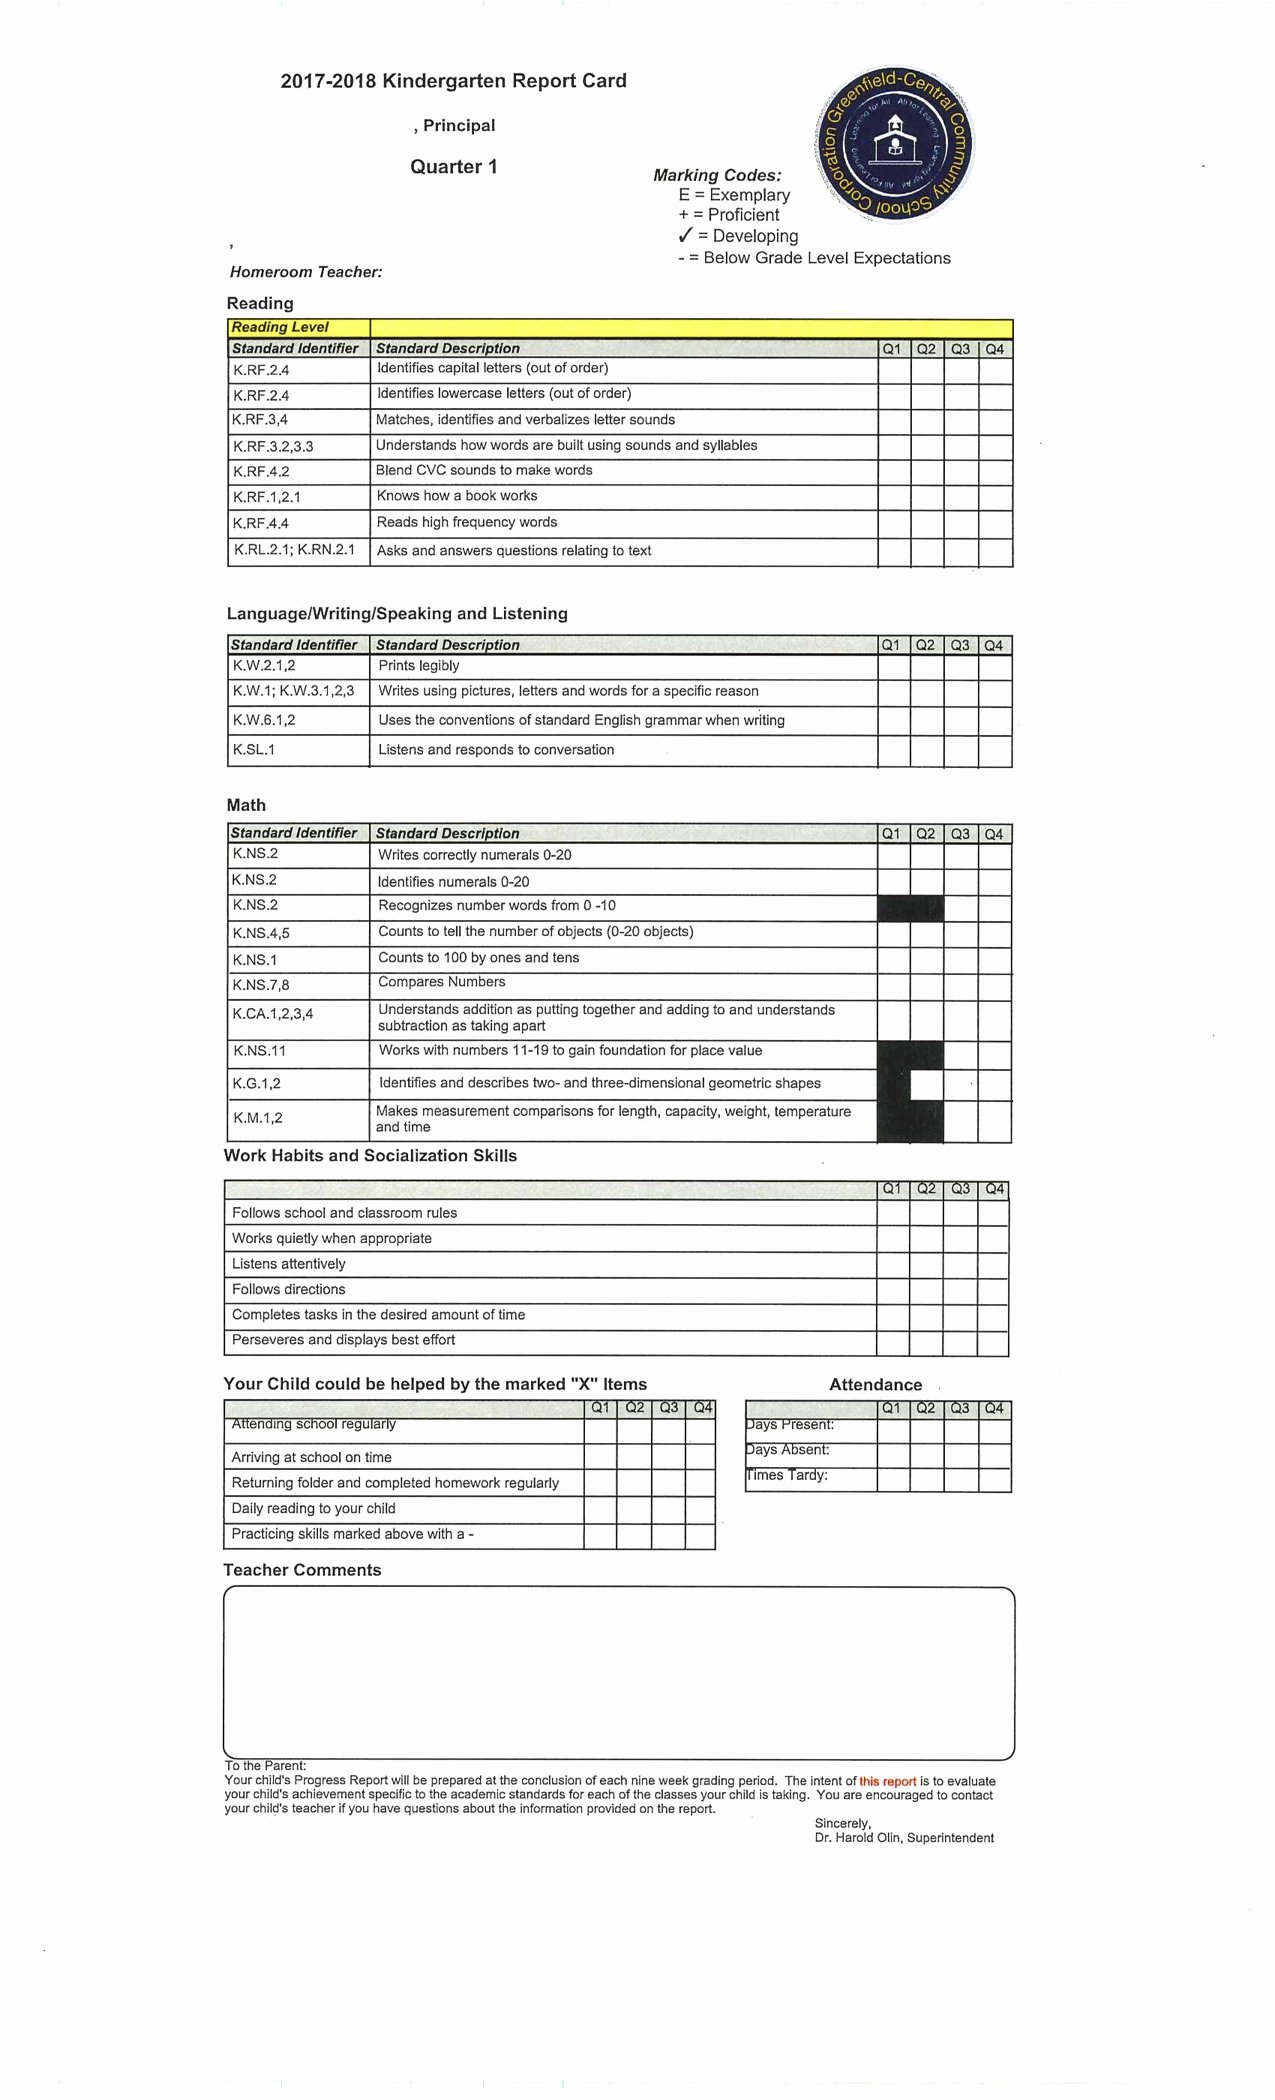 Preschool Report Card Template Luxury New Report Card Changes for 2017 2018 – J B Stephens